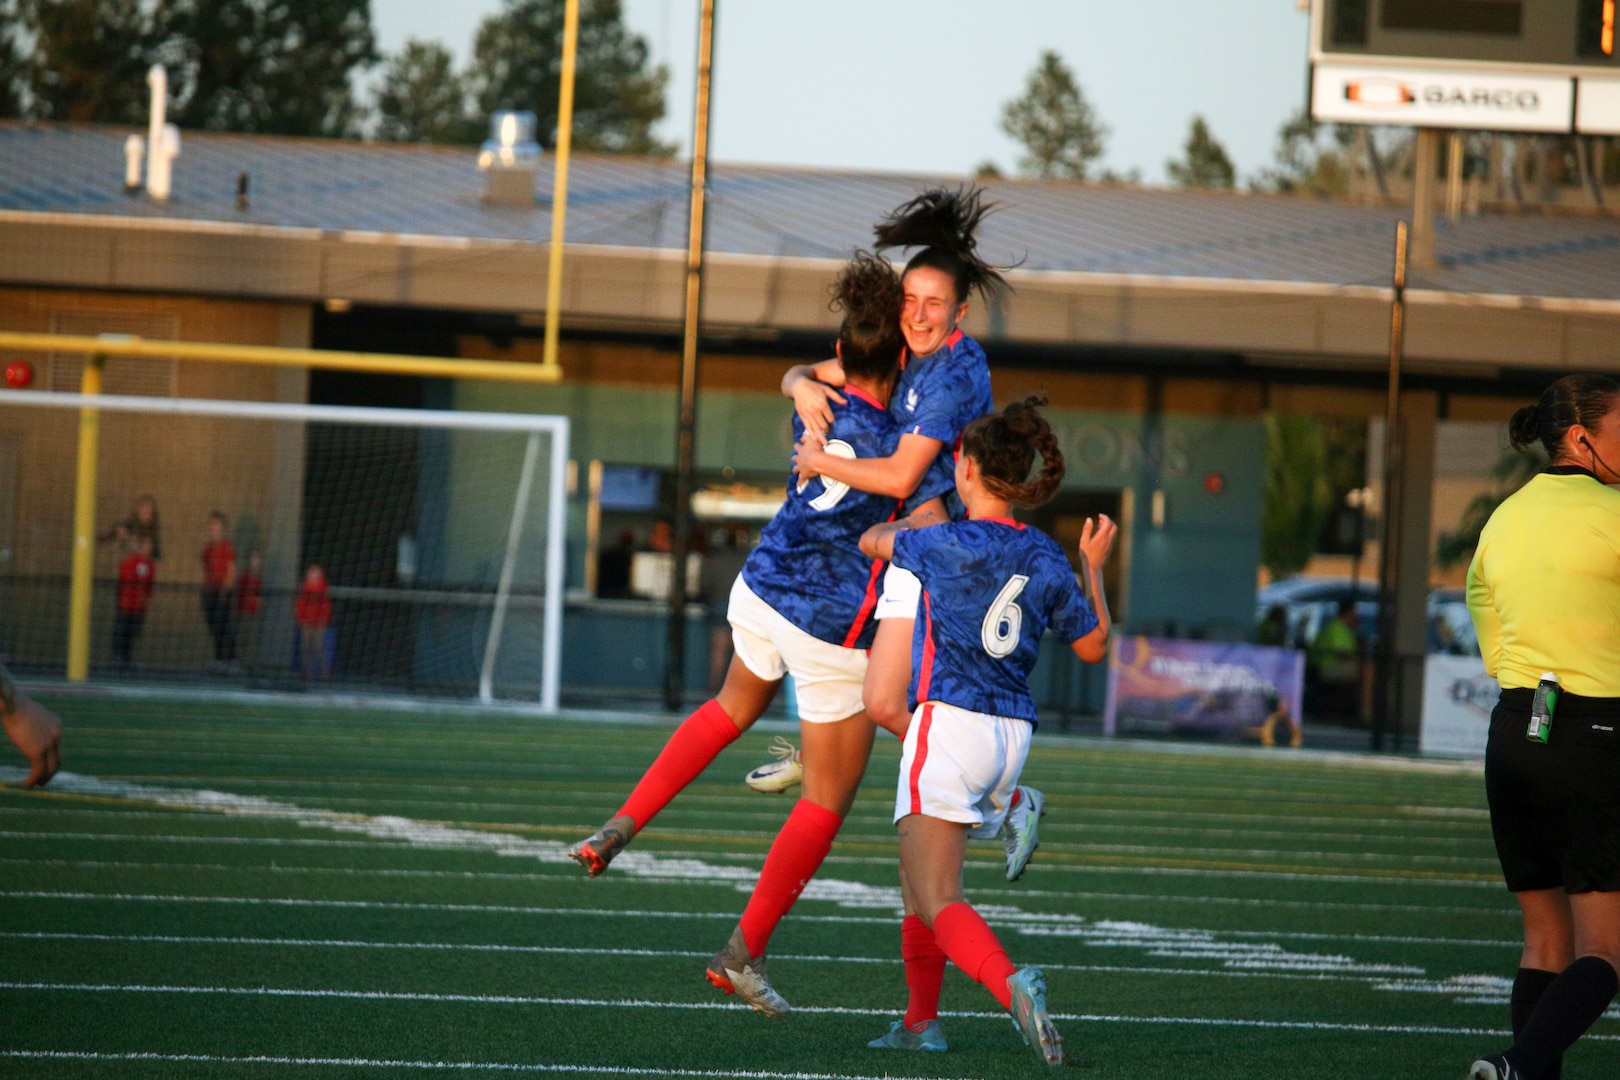 France's Aissa Belkasni (#19) celebrates with teammates after scroing their fist goal against Canada in match 16 of the 13th Conseil International du Sport Militaire (CISM) World Women's Military Football Championship hosted by Fairchild Air Force Base in Spokane, Washingon.  This year's championship features teams from the United States, Belgium, Cameroon, Canada, France, Germany, Ireland, Mali, Netherlands, and South Korea.  (Department of Defense Photo by Mr. Steven Dinote, released).